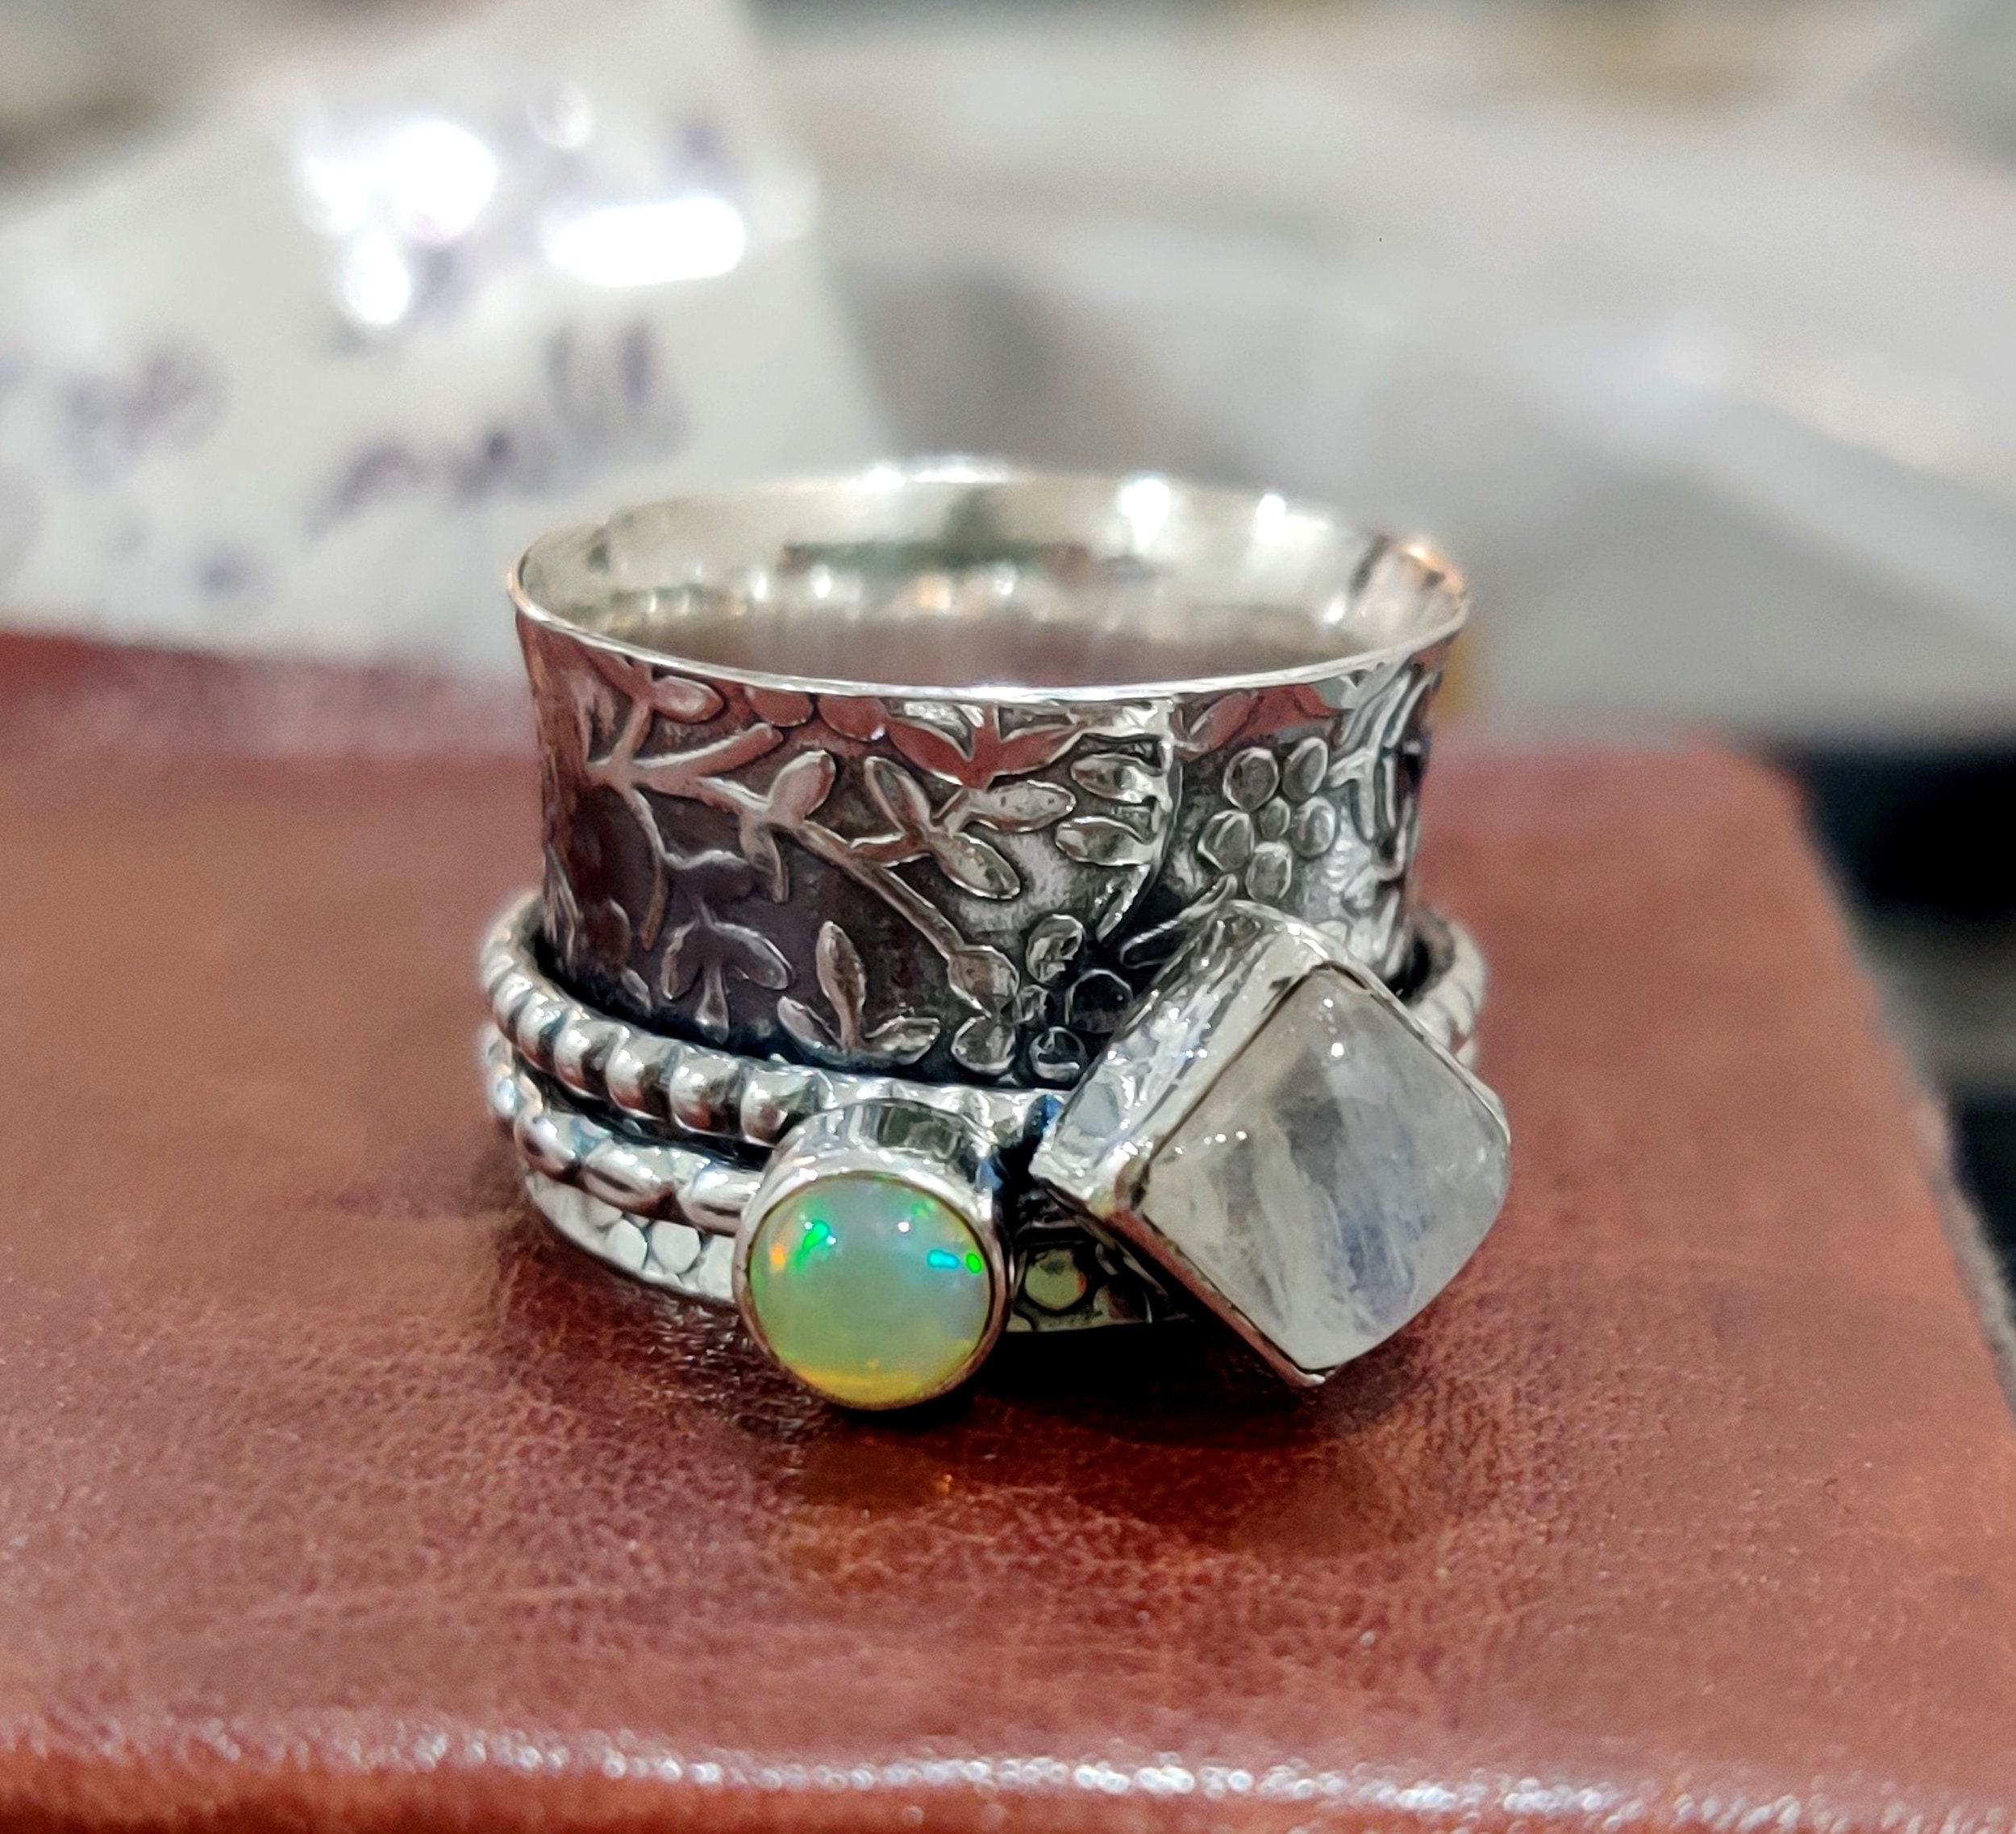 +++++++ Natural Opal Spinner Ring 925 Sterling Silver Ring Meditation Ring Handmade Ring Statement Ring Brass Ring Silver Jewelry